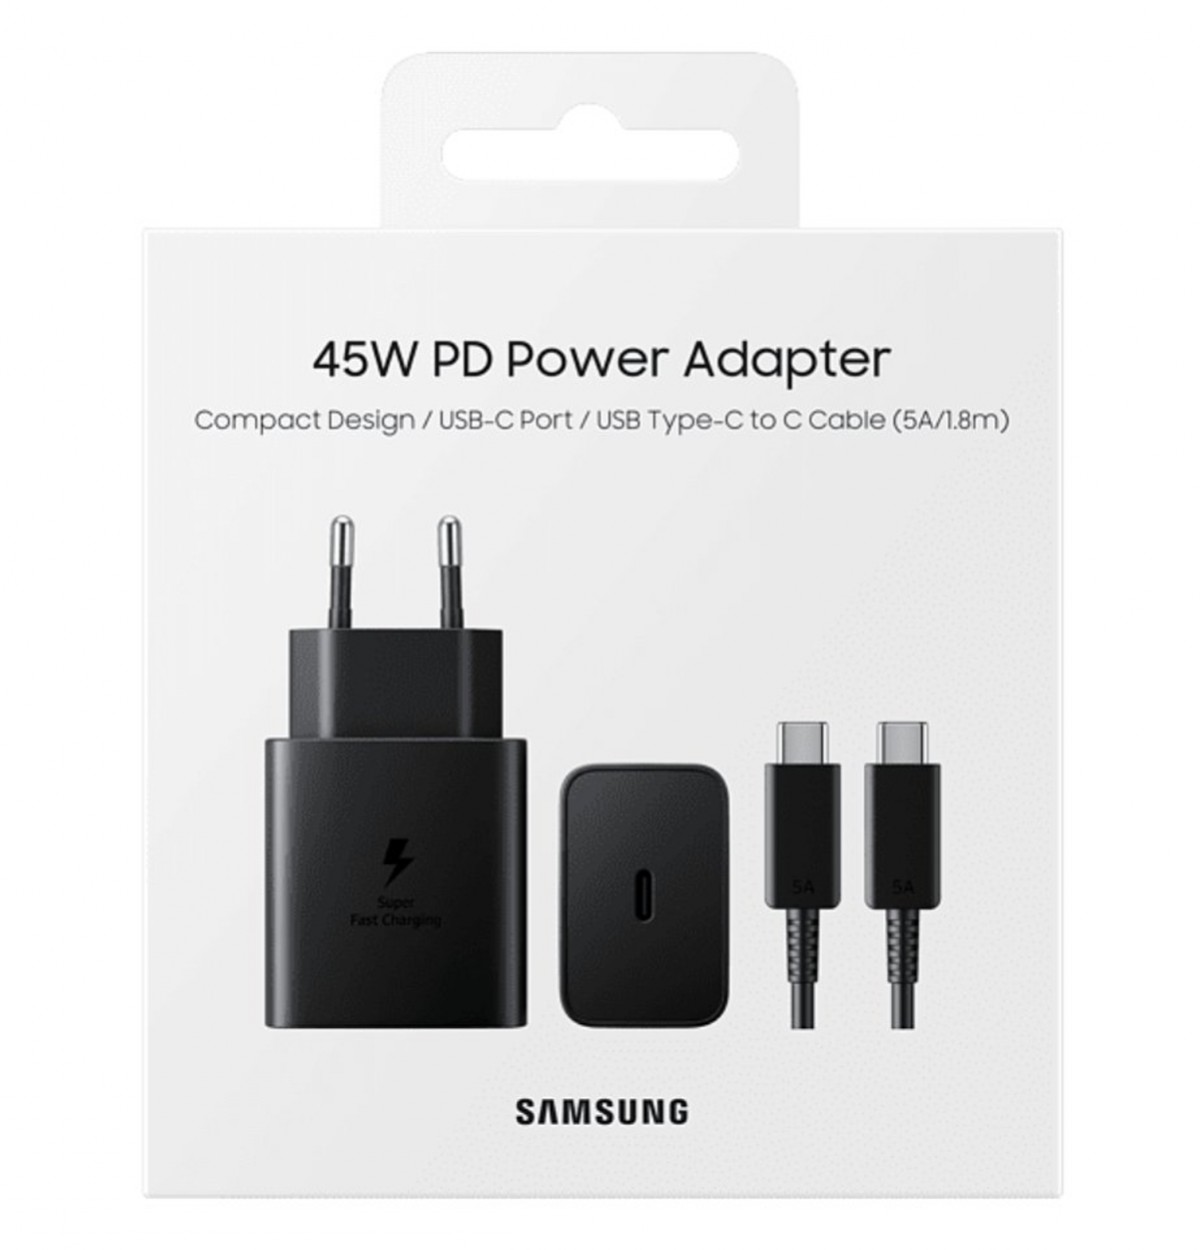 Samsung is bringing a new 45W fast charger for the Galaxy S22 Ultra